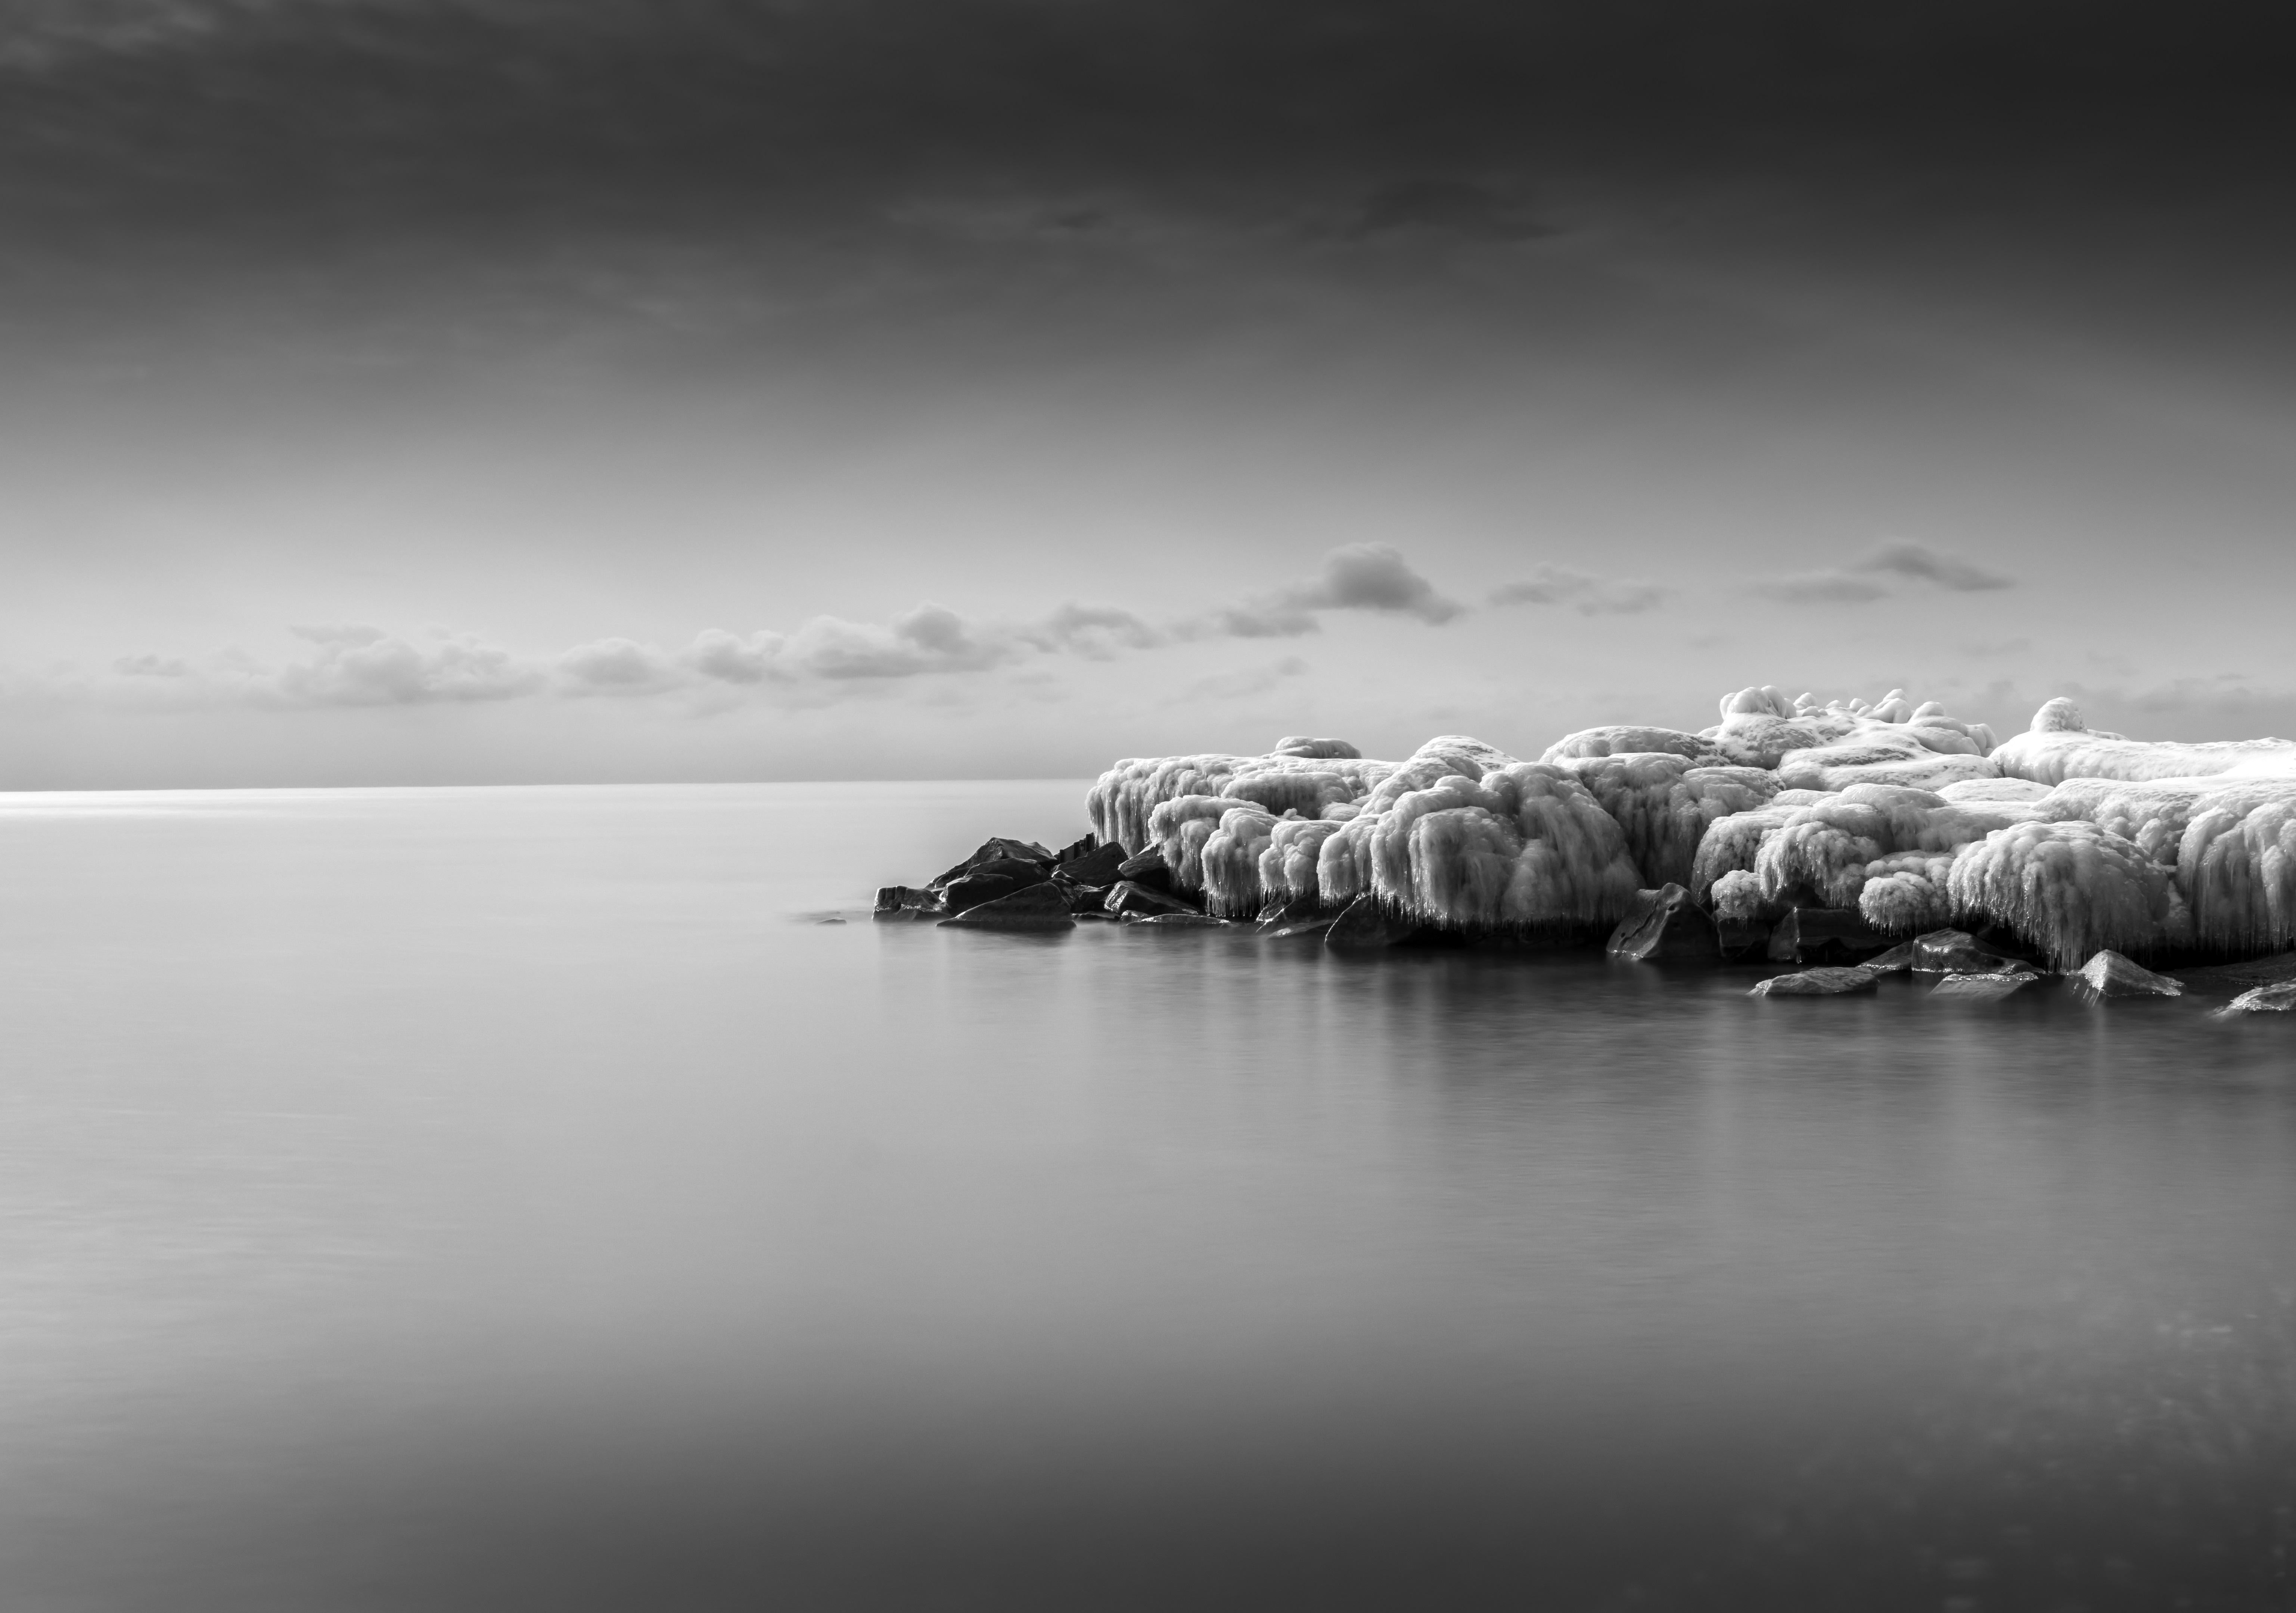 Rick Bogacz Black and White Photograph - "Ice Covered Rocks, The Beaches", signed archival pigment print